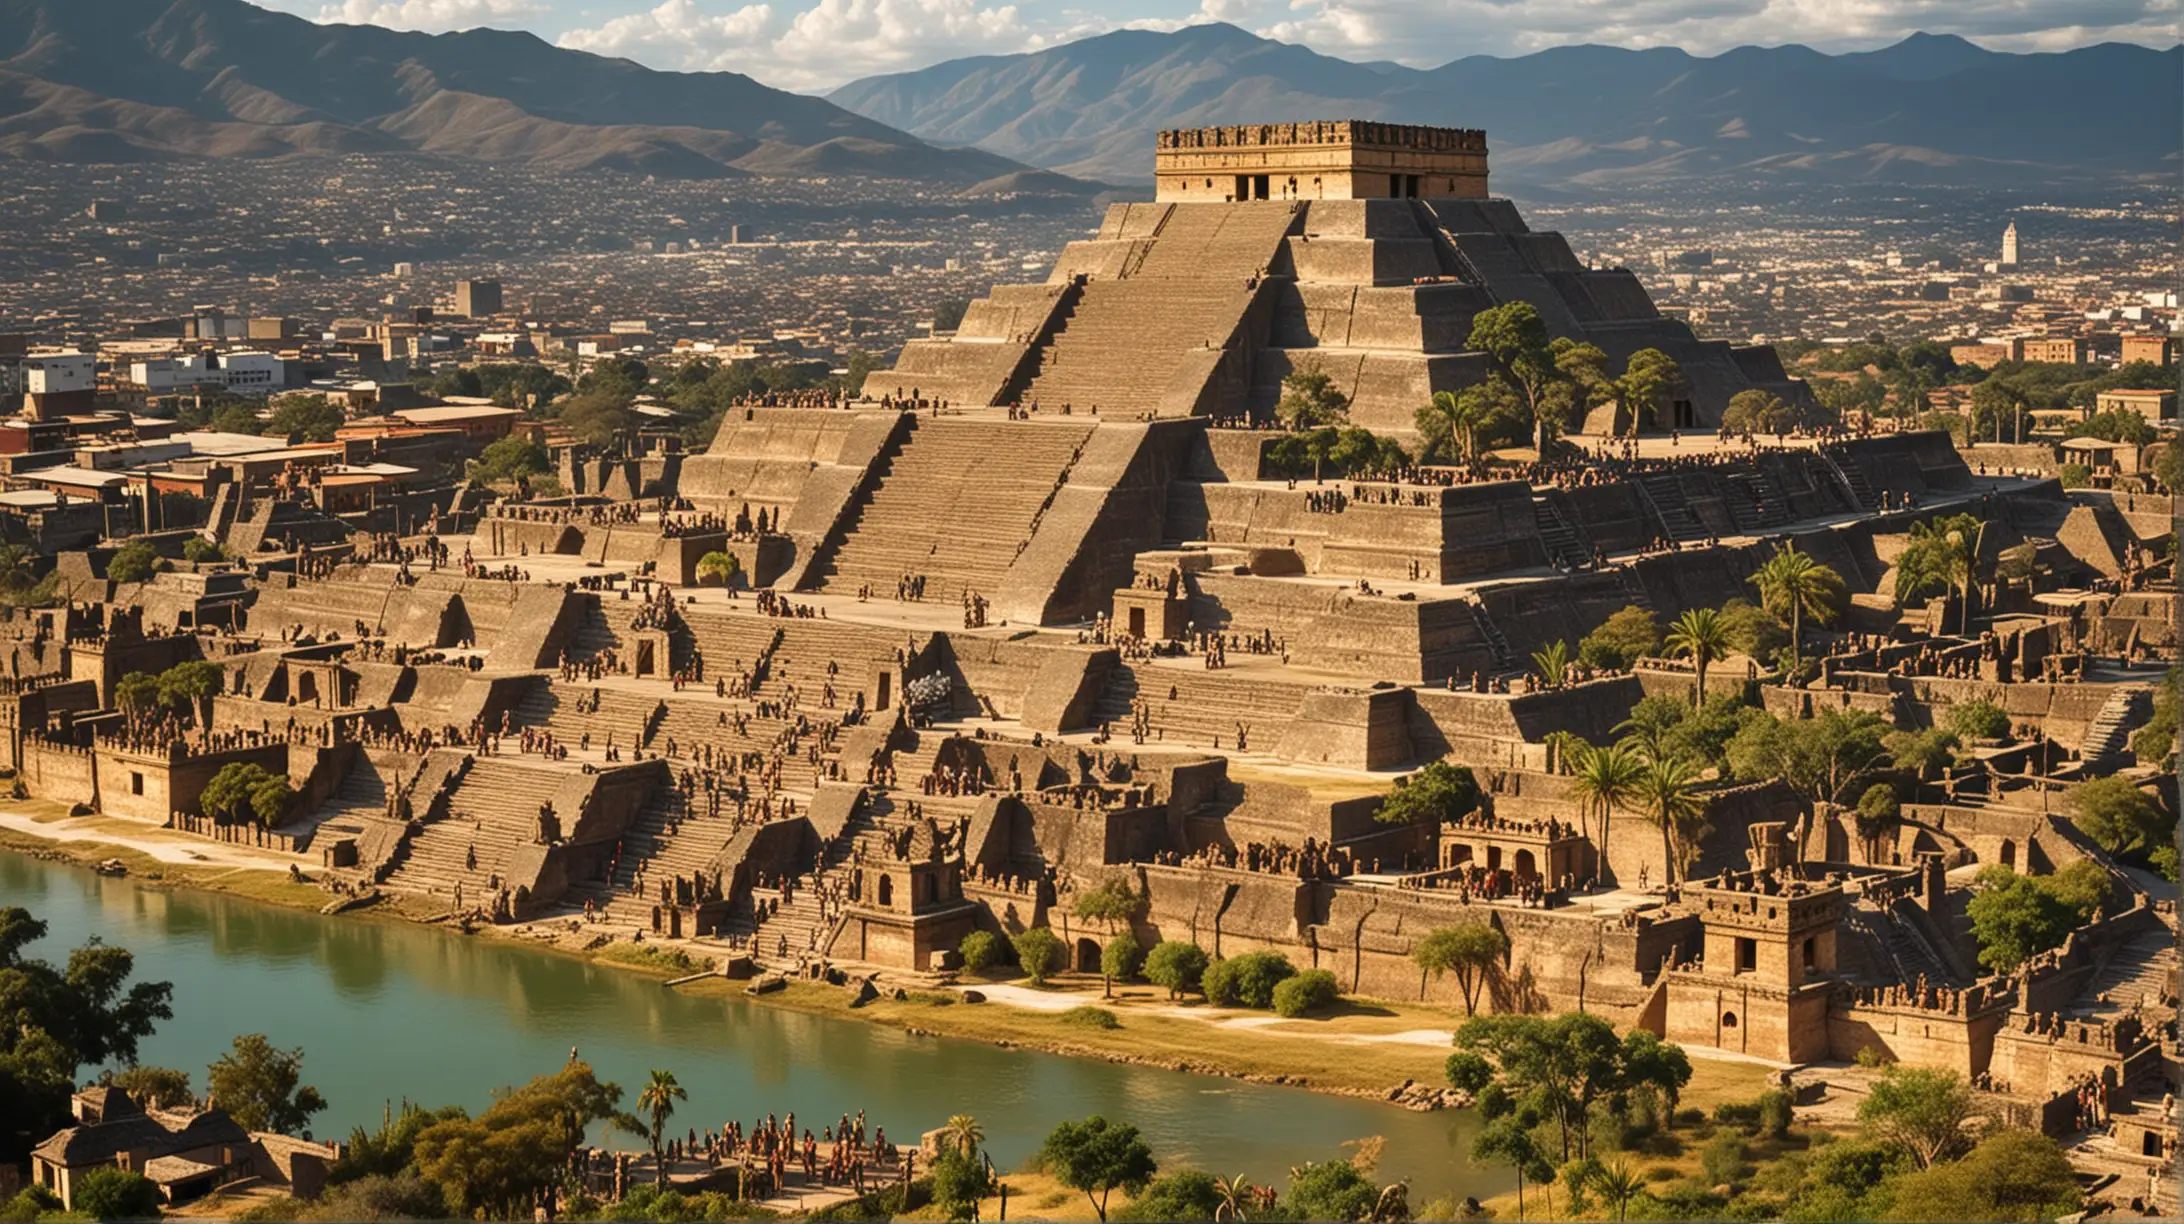 Ancient Aztec Civilization Birth of Tenochtitln in the Valley of Mexico